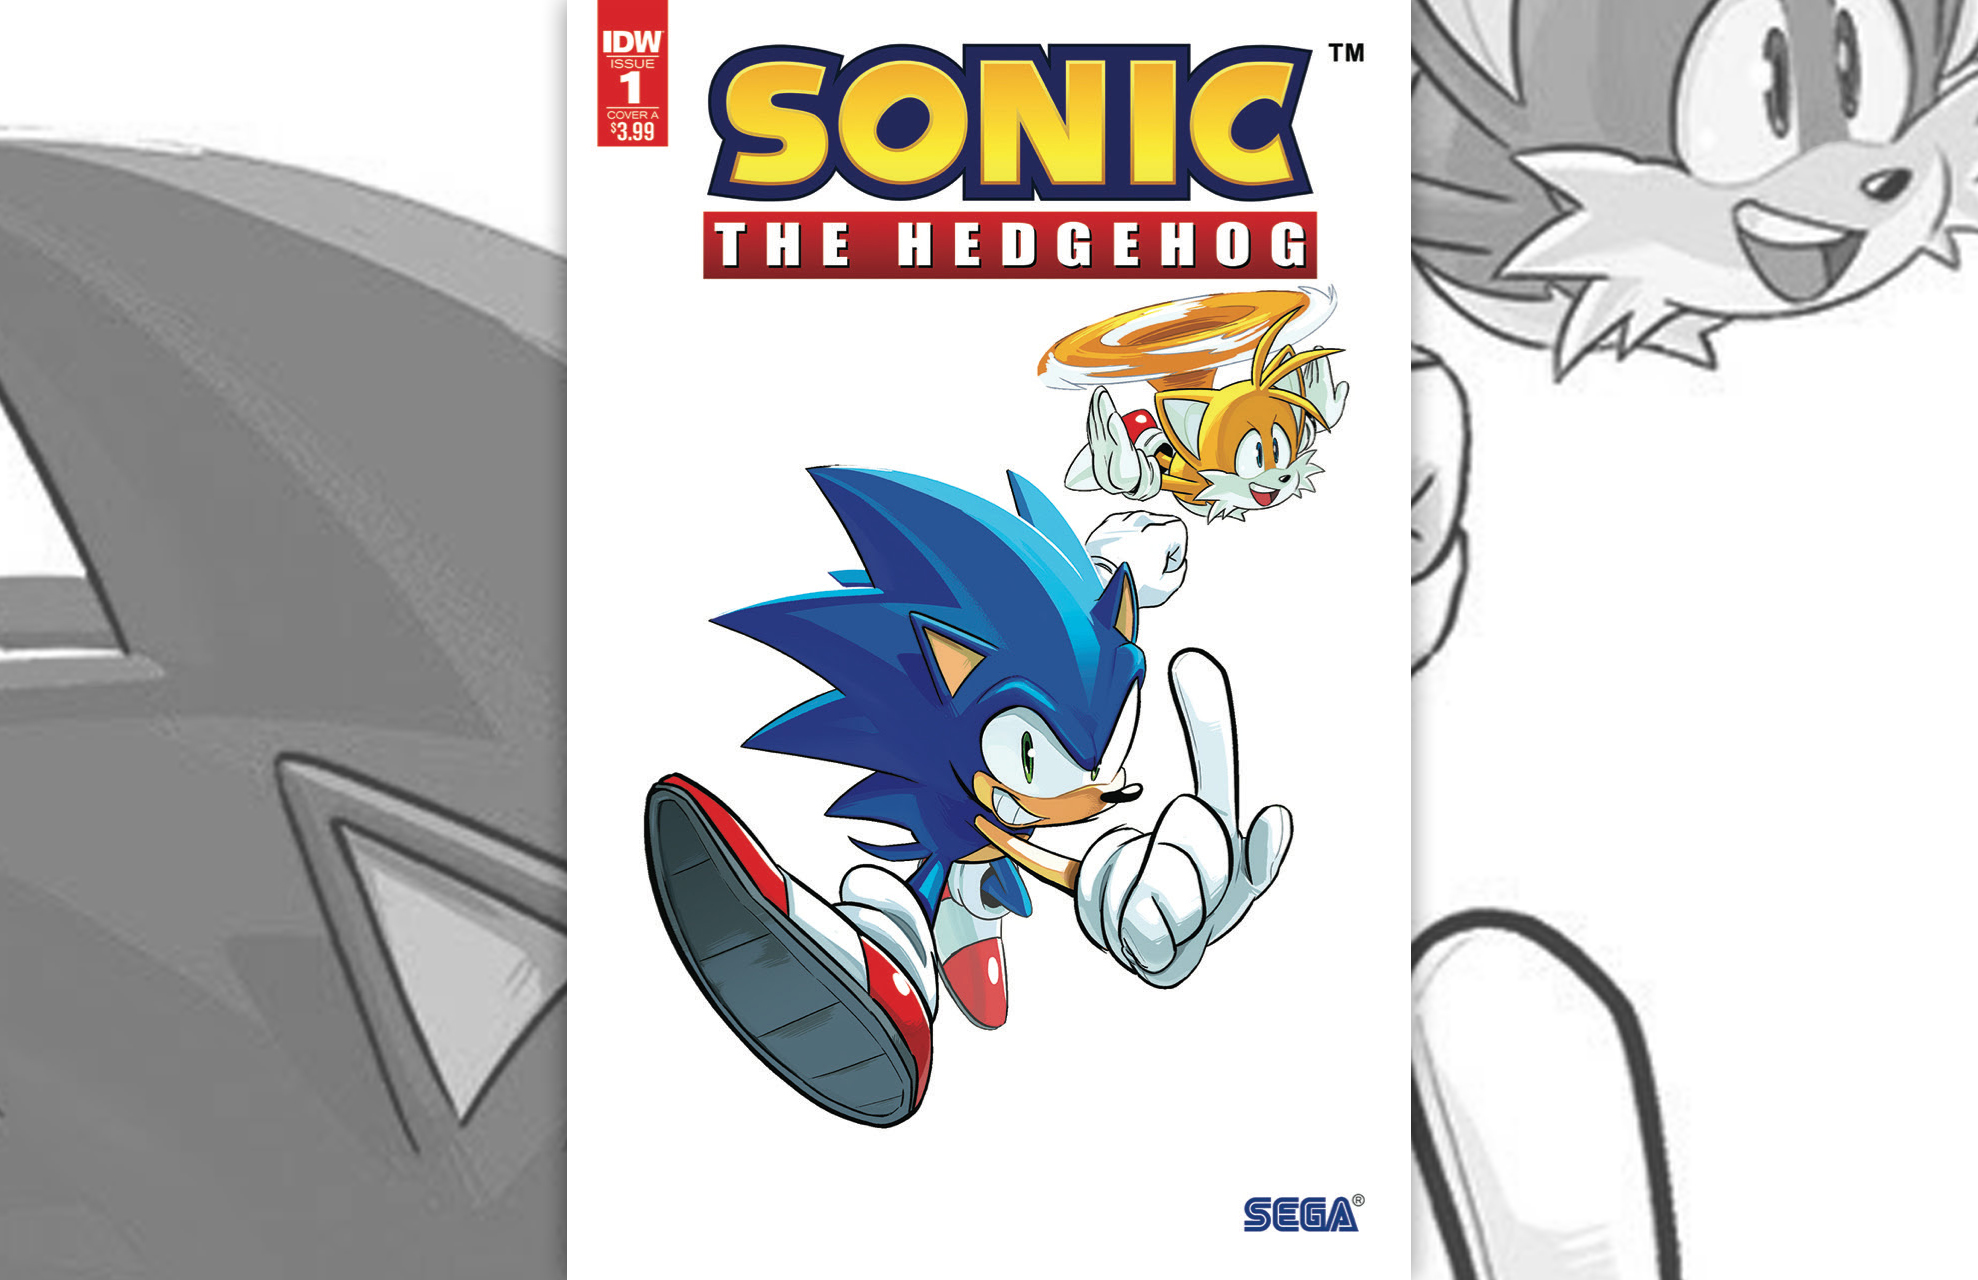 Sonic Central: IDW Sonic the Hedgehog one shot comic starring Amy Rose  announced » SEGAbits - #1 Source for SEGA News